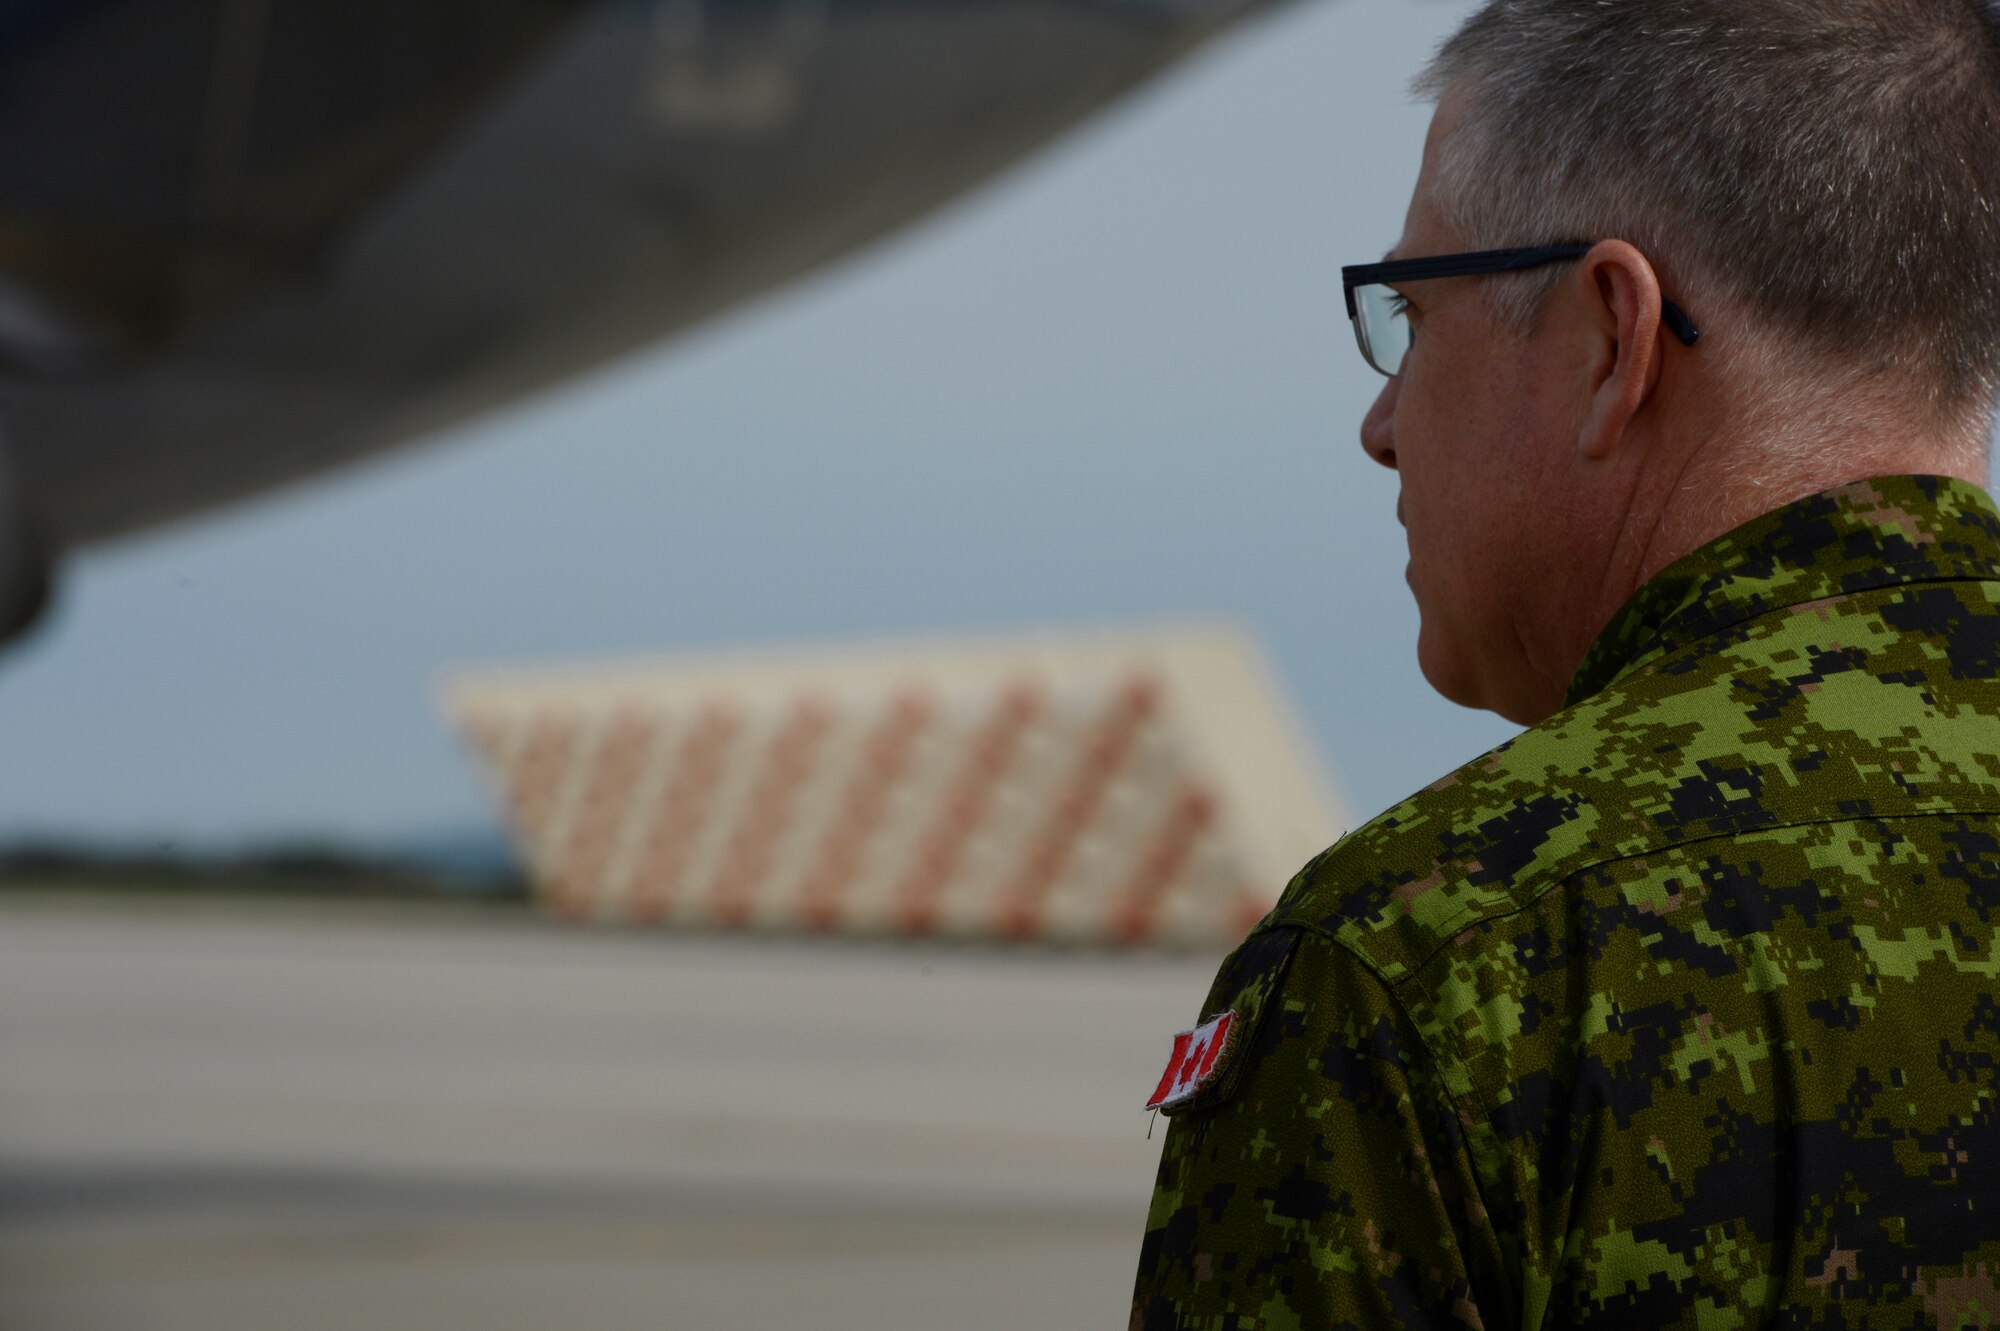 A Royal Canadian Air Force service member arrives on Spangdahlem Air Base, Germany, May 1, 2014. The Canadian Armed Forces will join Romania and other NATO allies currently operating in the region as the alliance’s part of reassurance measures to Eastern and Central Europe.  (U.S. Air Force photo by Staff Sgt. Christopher Ruano/Released)